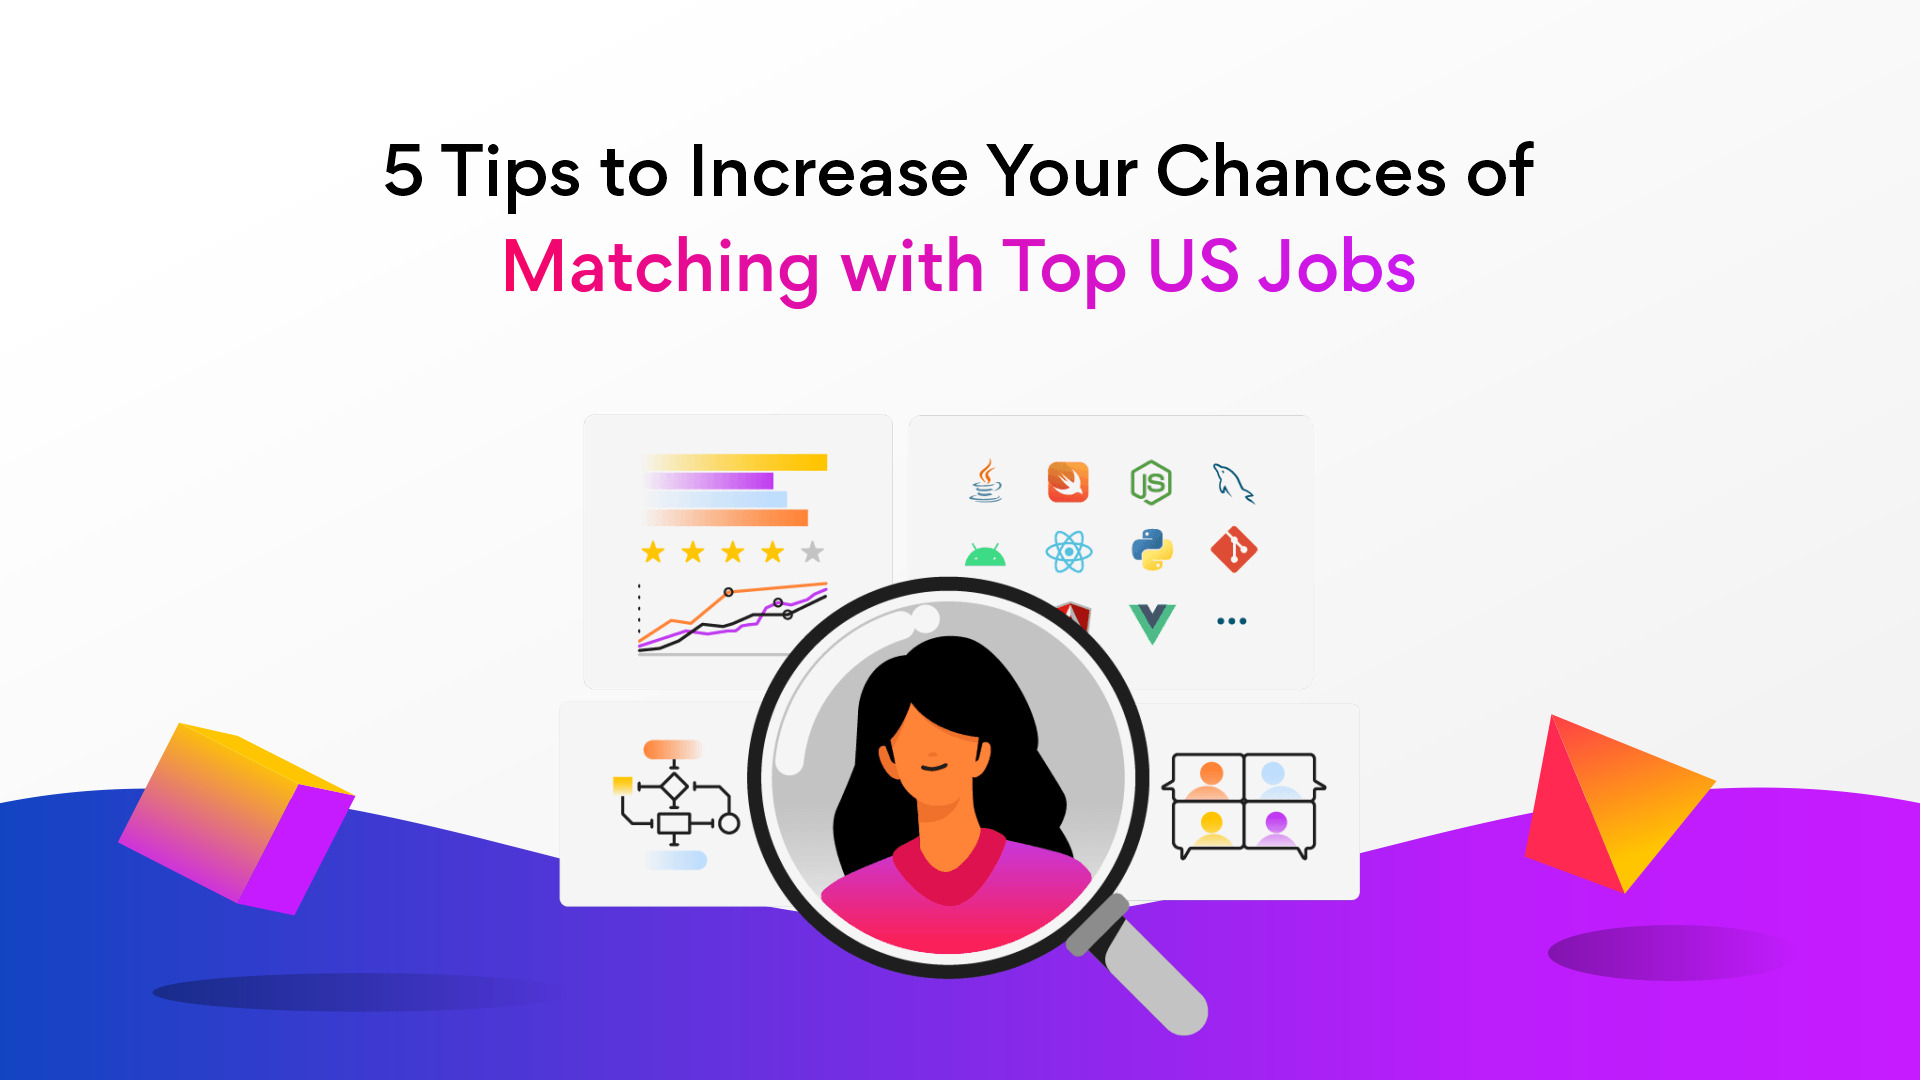 Tips to Increase Your Chances of Matching with Top US Jobs